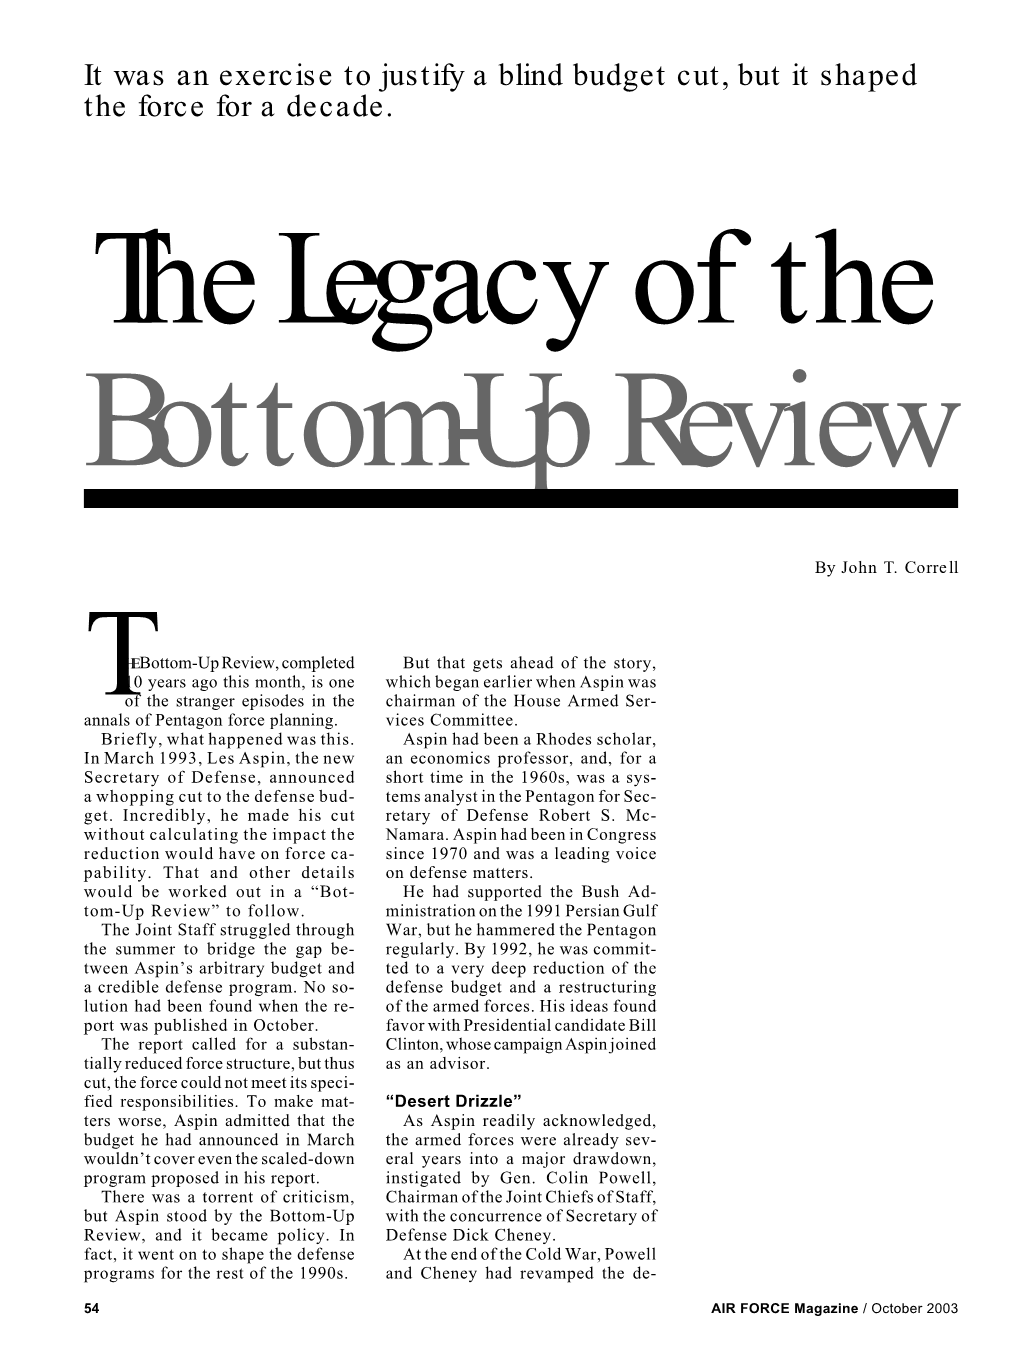 It Was an Exercise to Justify a Blind Budget Cut, but It Shaped the Force for a Decade. the Legacy of the Bottom-Up Review